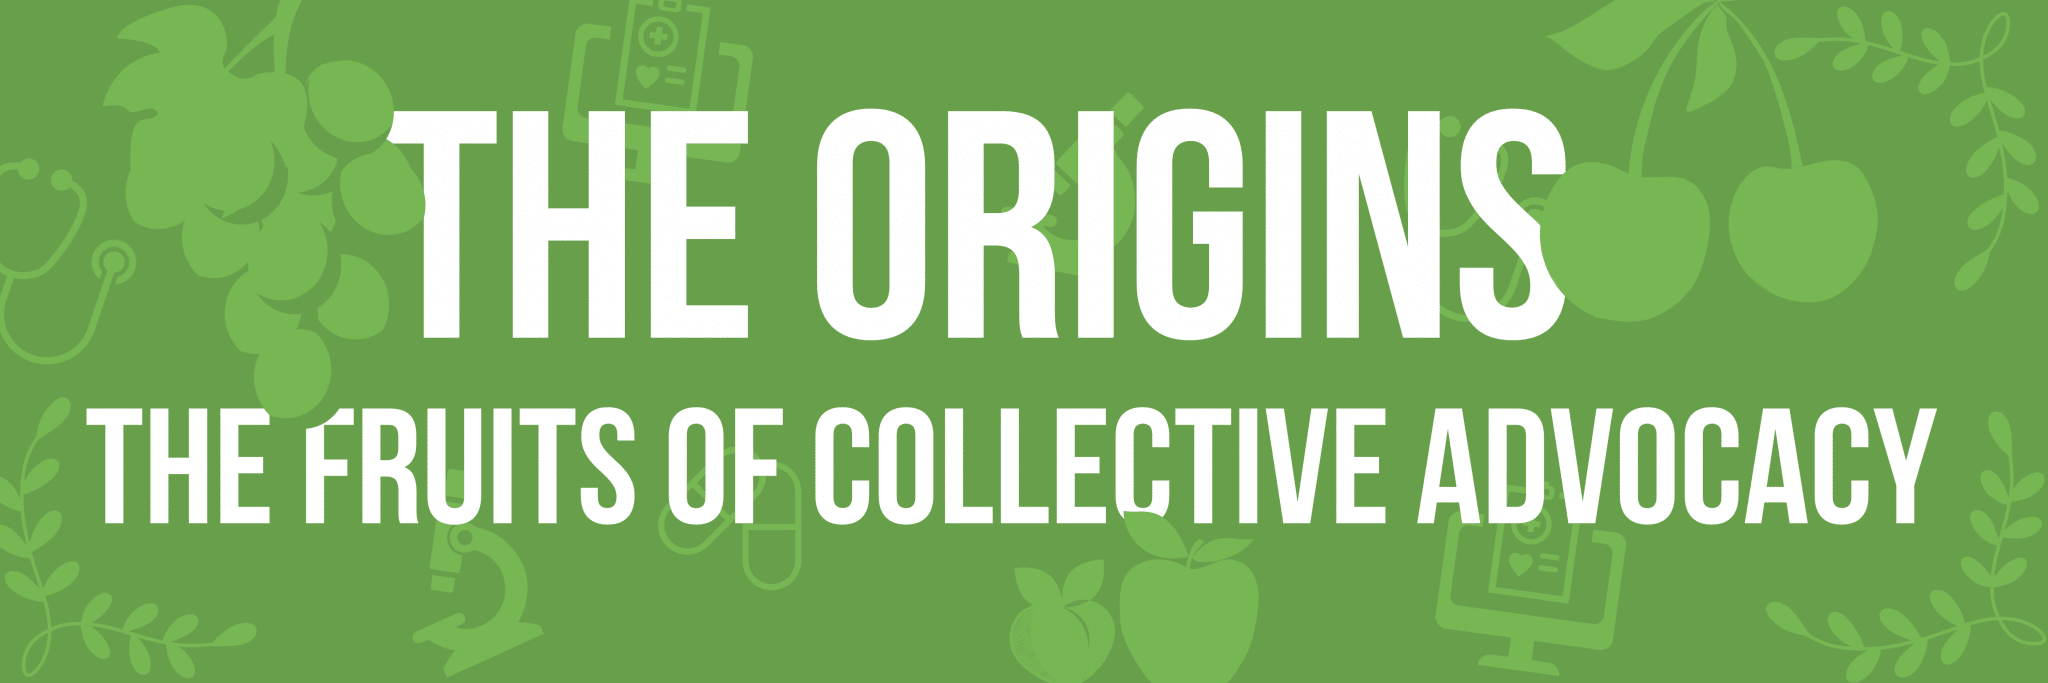 THE ORIGINS: THE FRUITS OF COLLECTIVE ADVOCACY